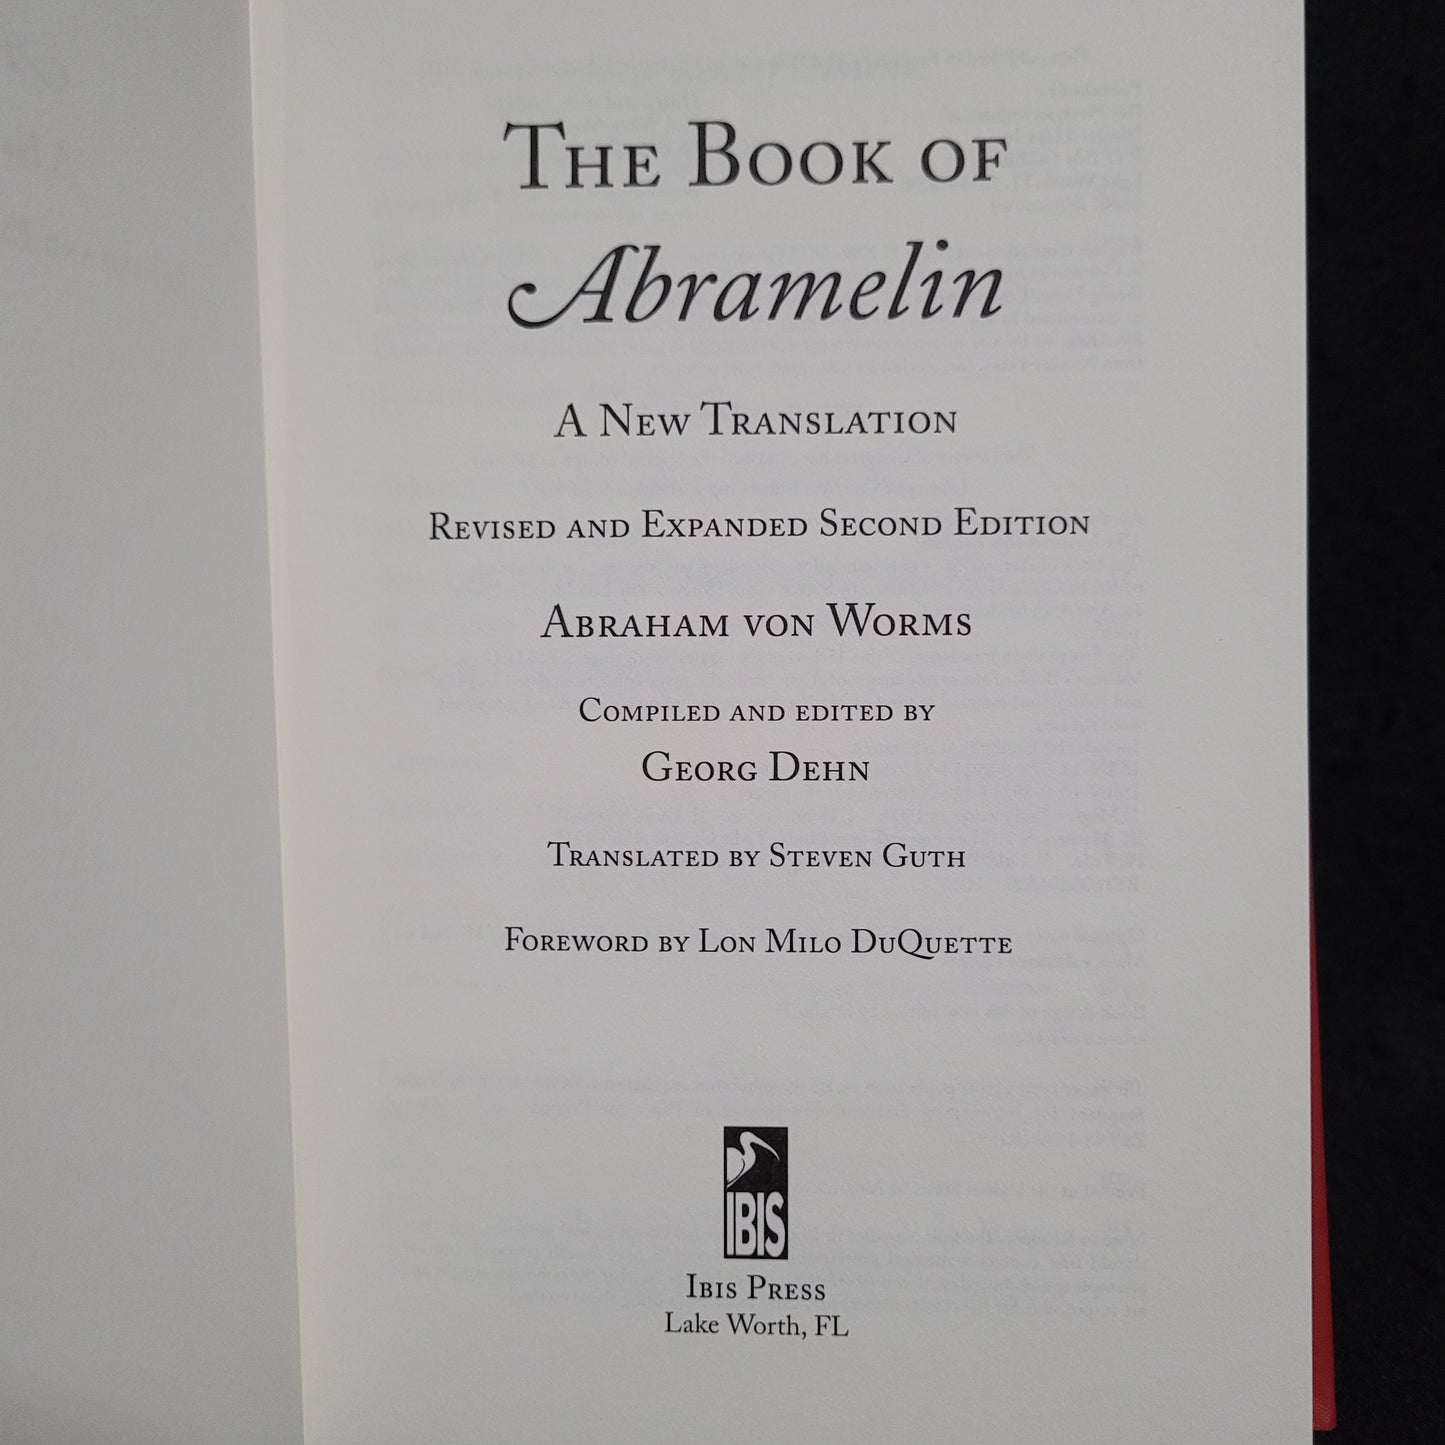 The Book of Abramelin: A New Translation Compiled and Edited by Georg Dehn (Ibis Press, 2015) Hardcover